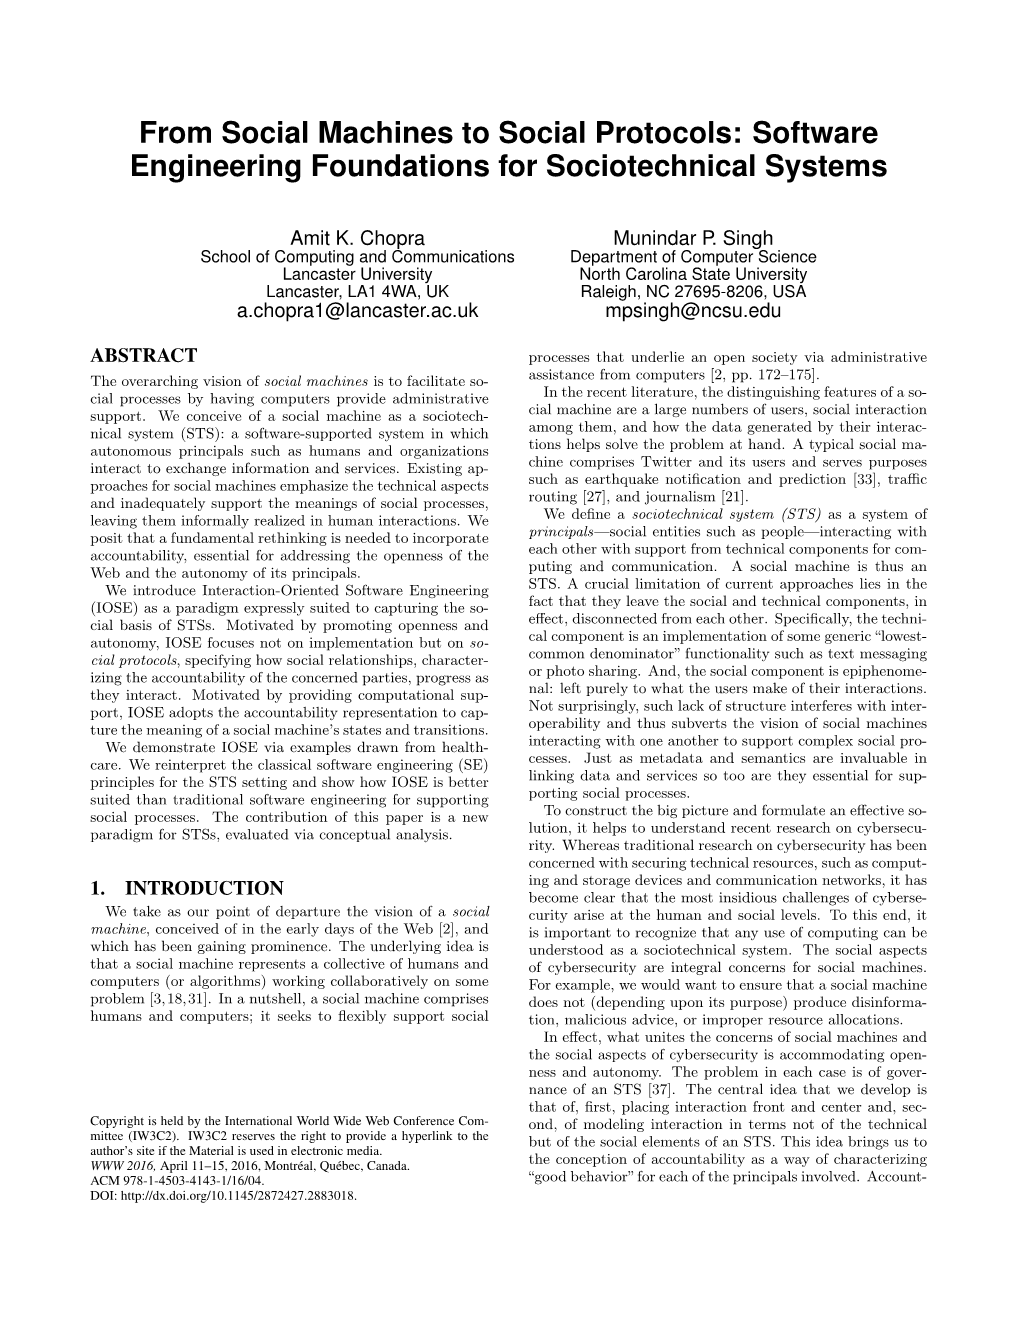 Software Engineering Foundations for Sociotechnical Systems